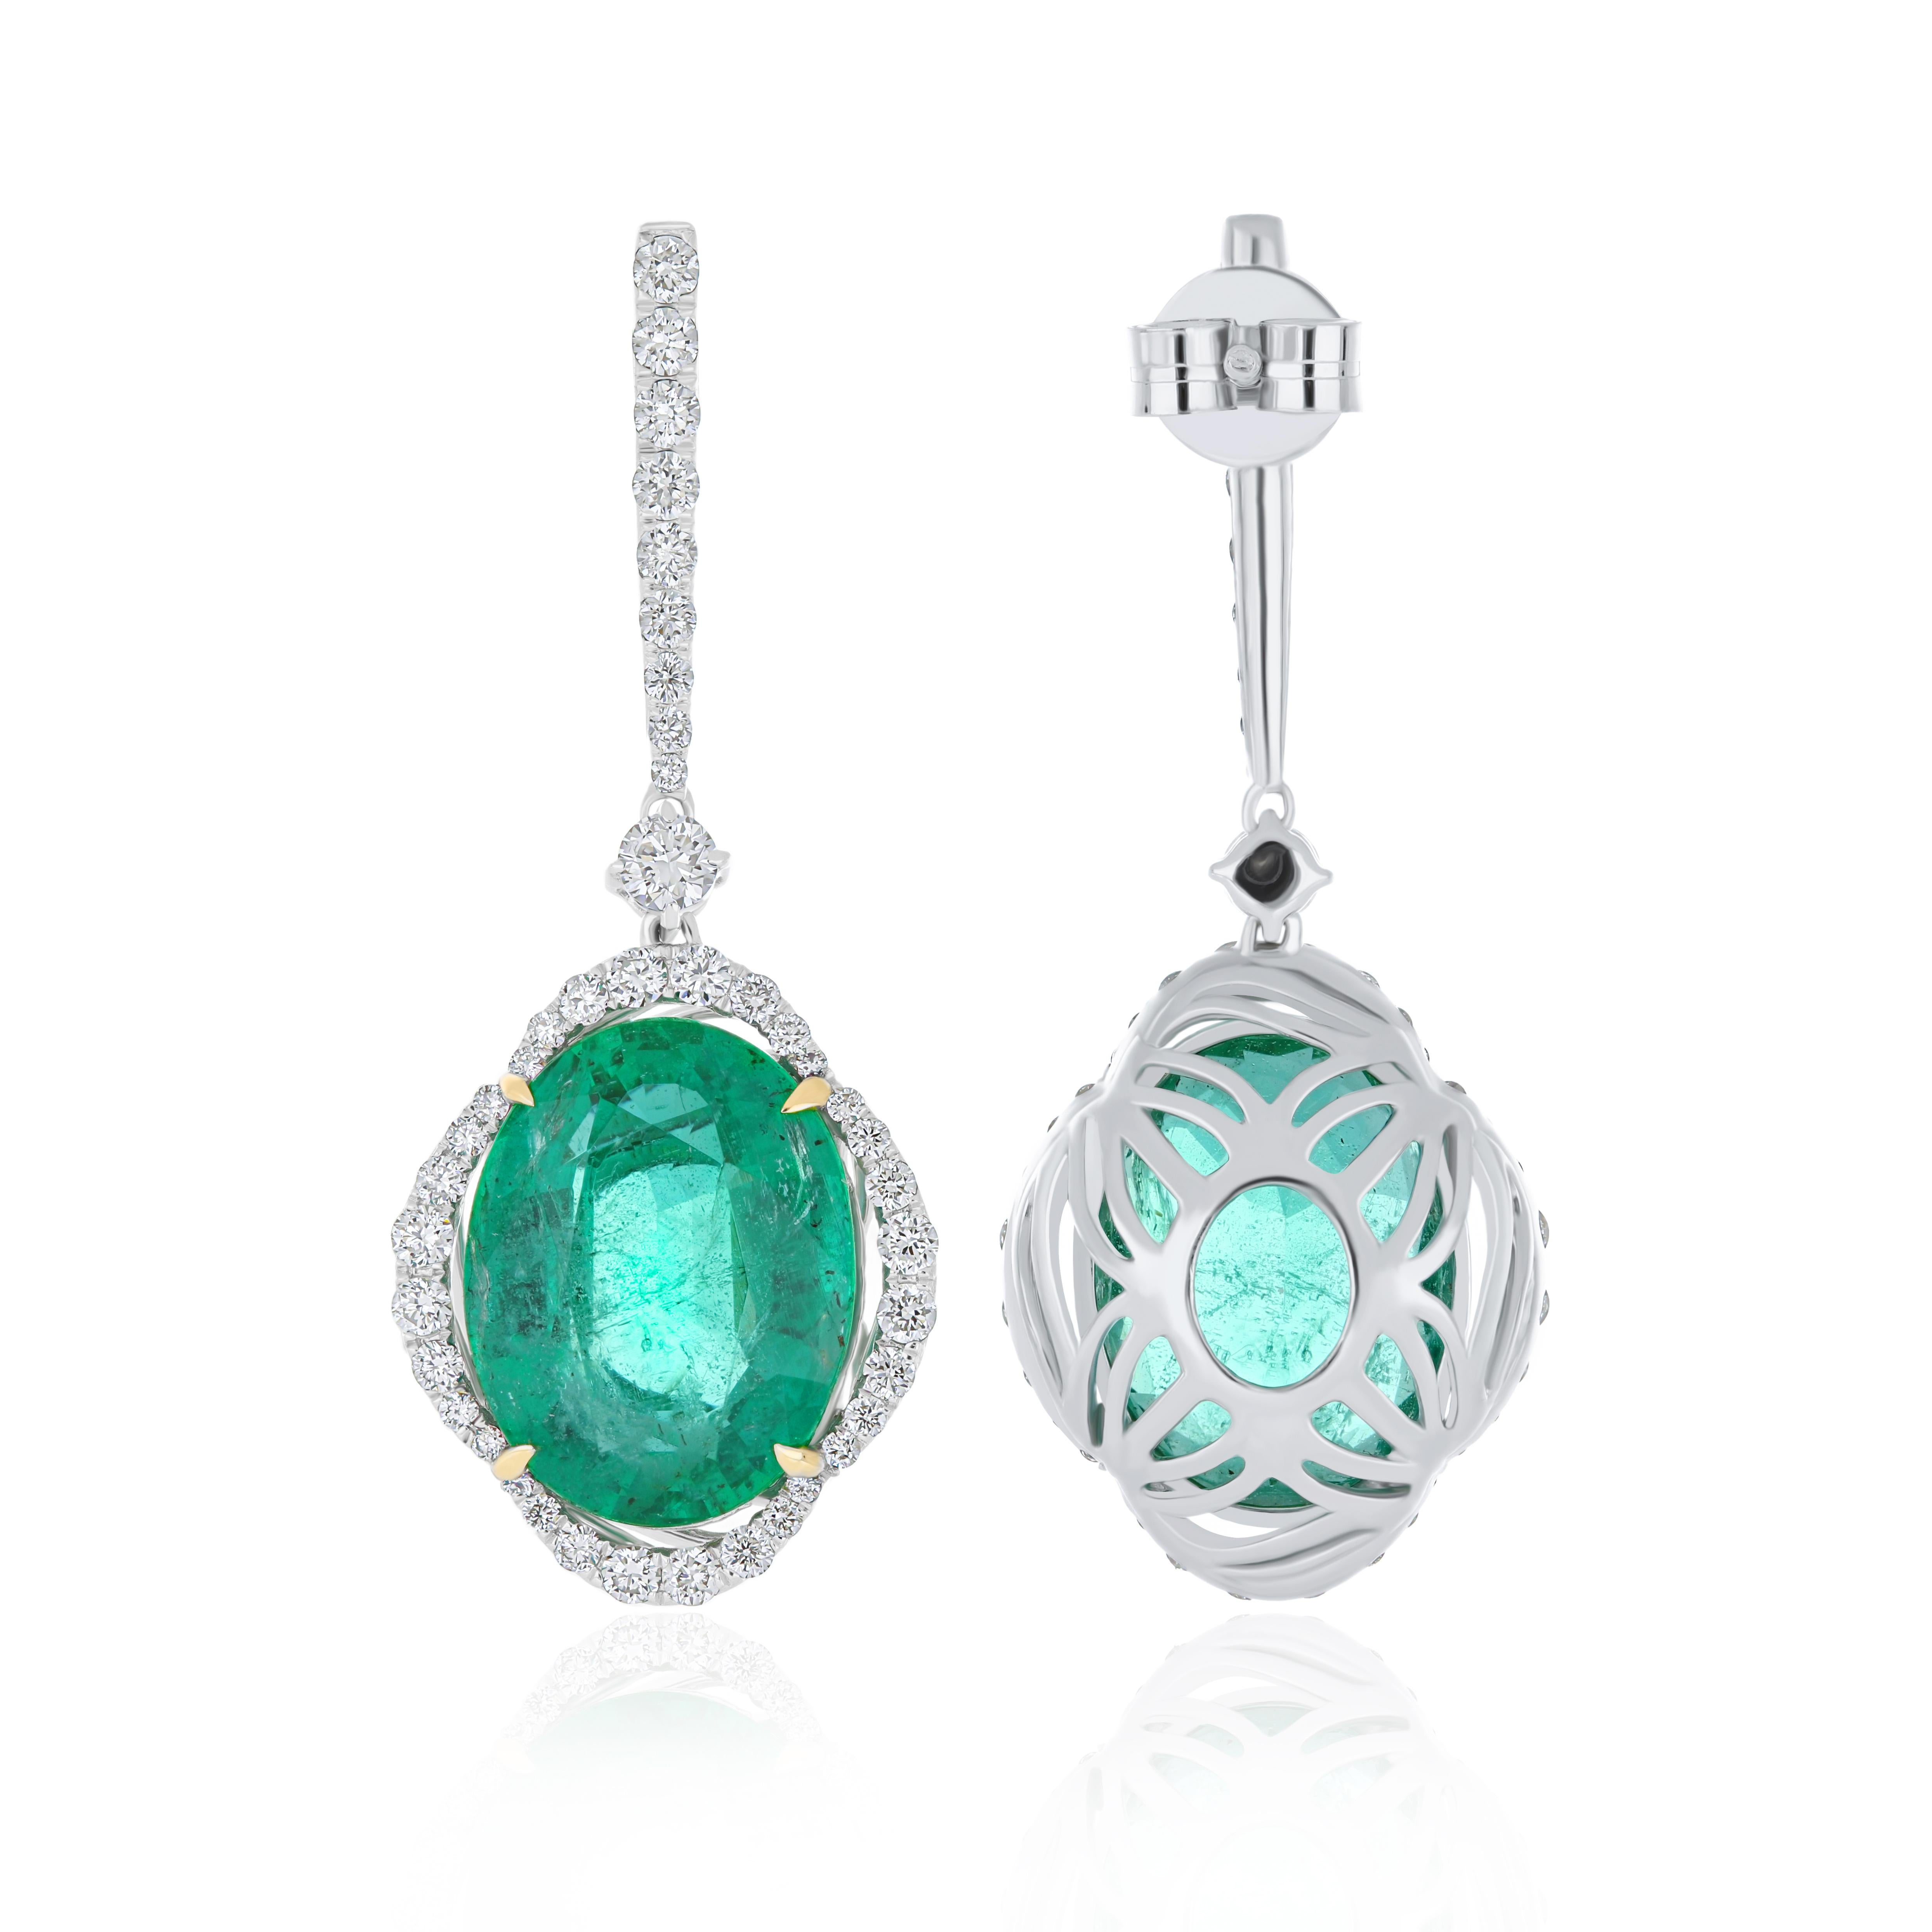 Oval Cut  Emeralds and Daimond Drop Earrings in 18 Karat White Gold Hand-Craft Earring For Sale